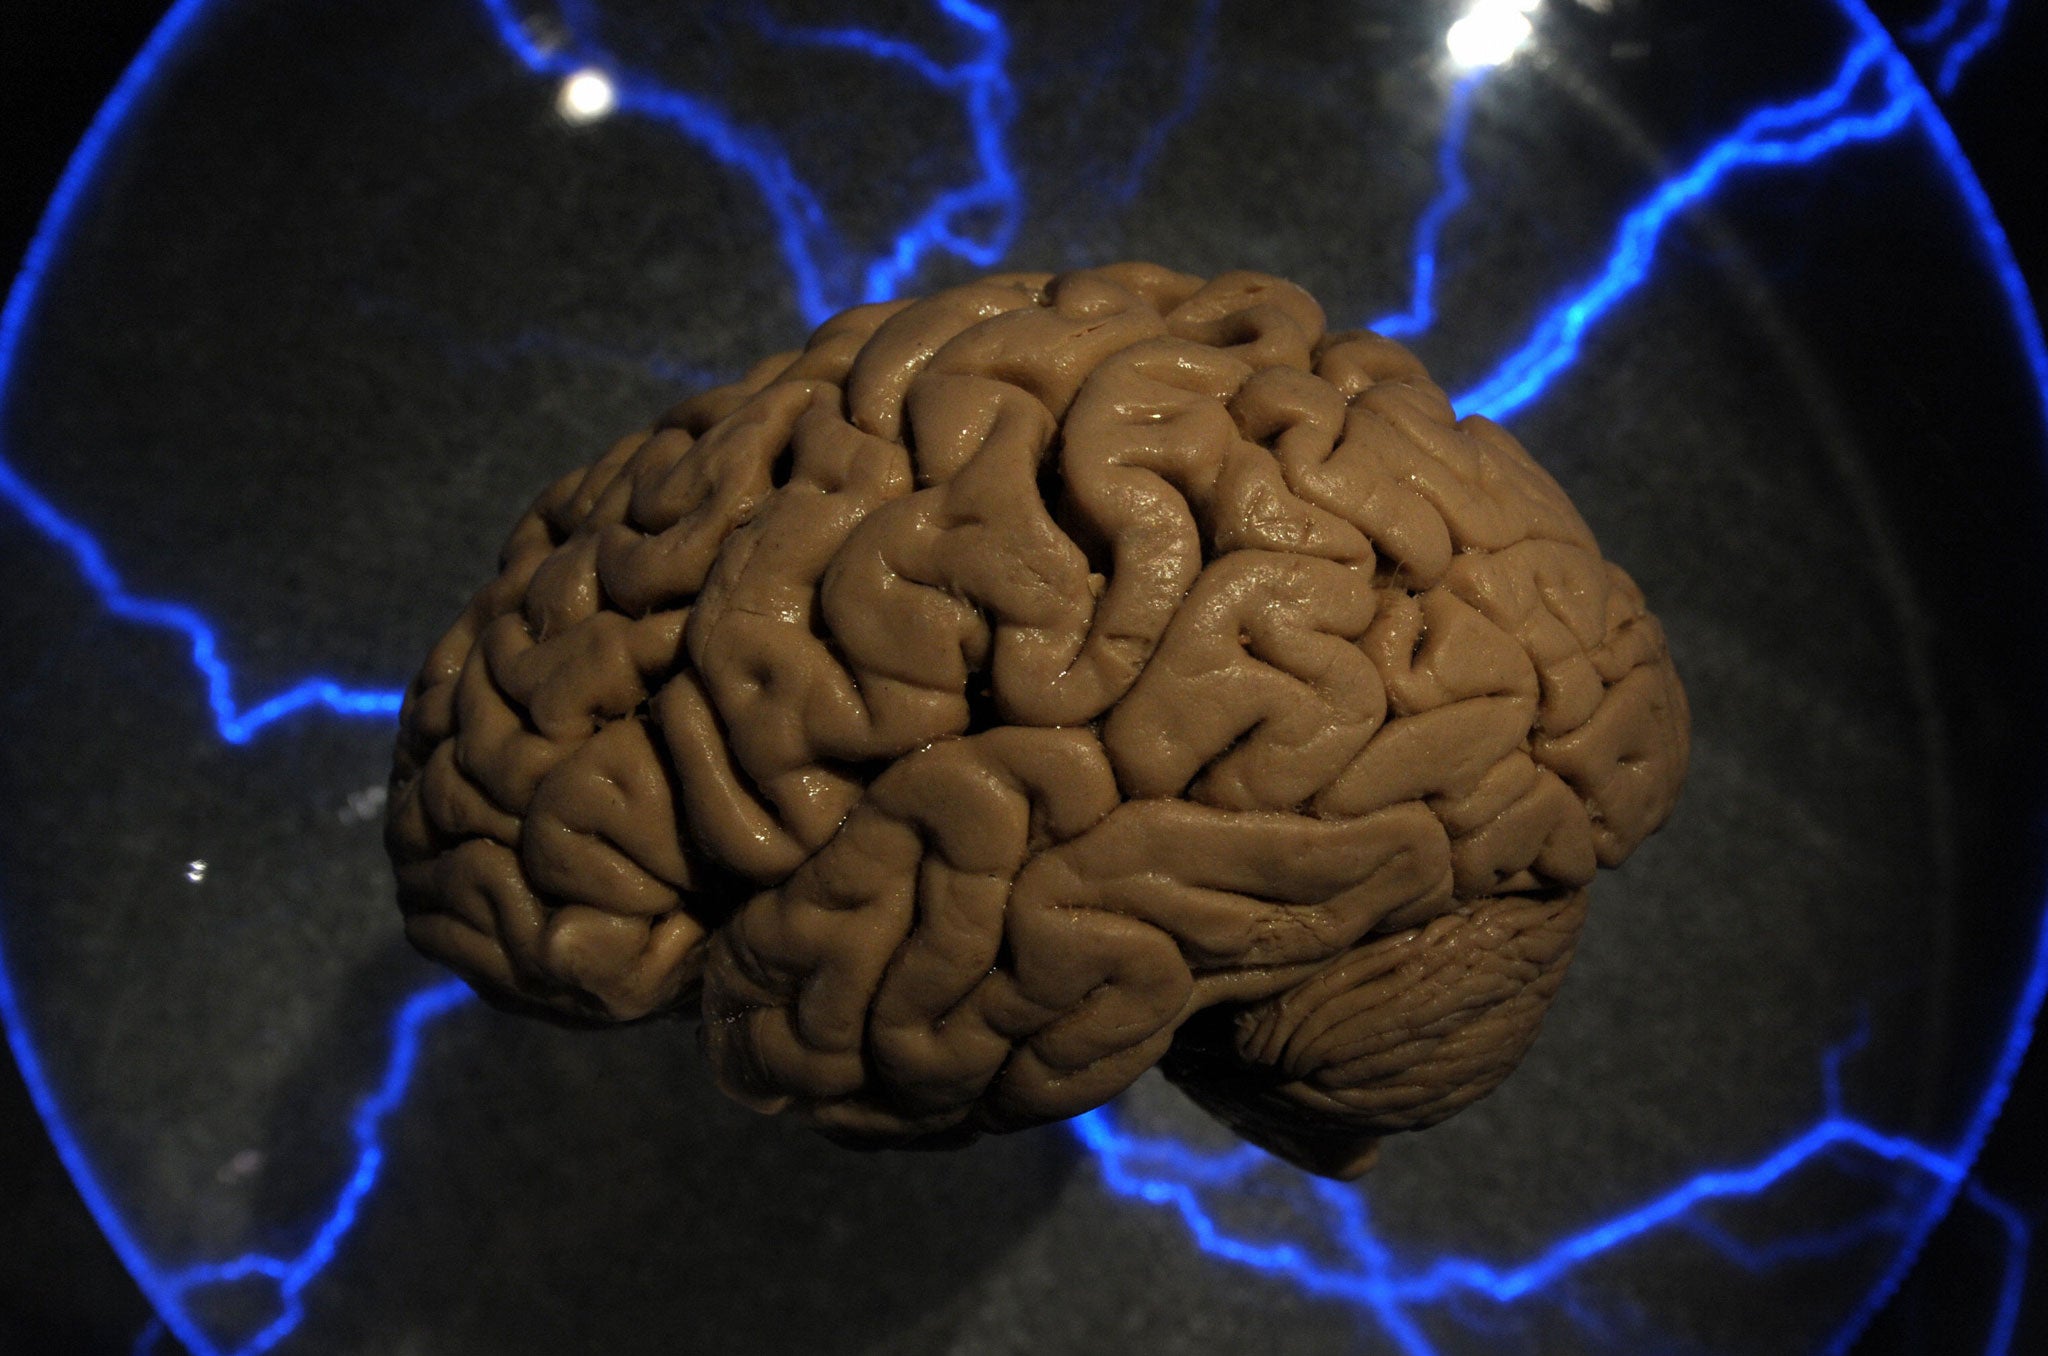 An actual human brain displayed inside a glass box, as part of an interactive exhbition 'Brain: a world inside your head', in Sao Paulo, Brazil, on August 21, 2009